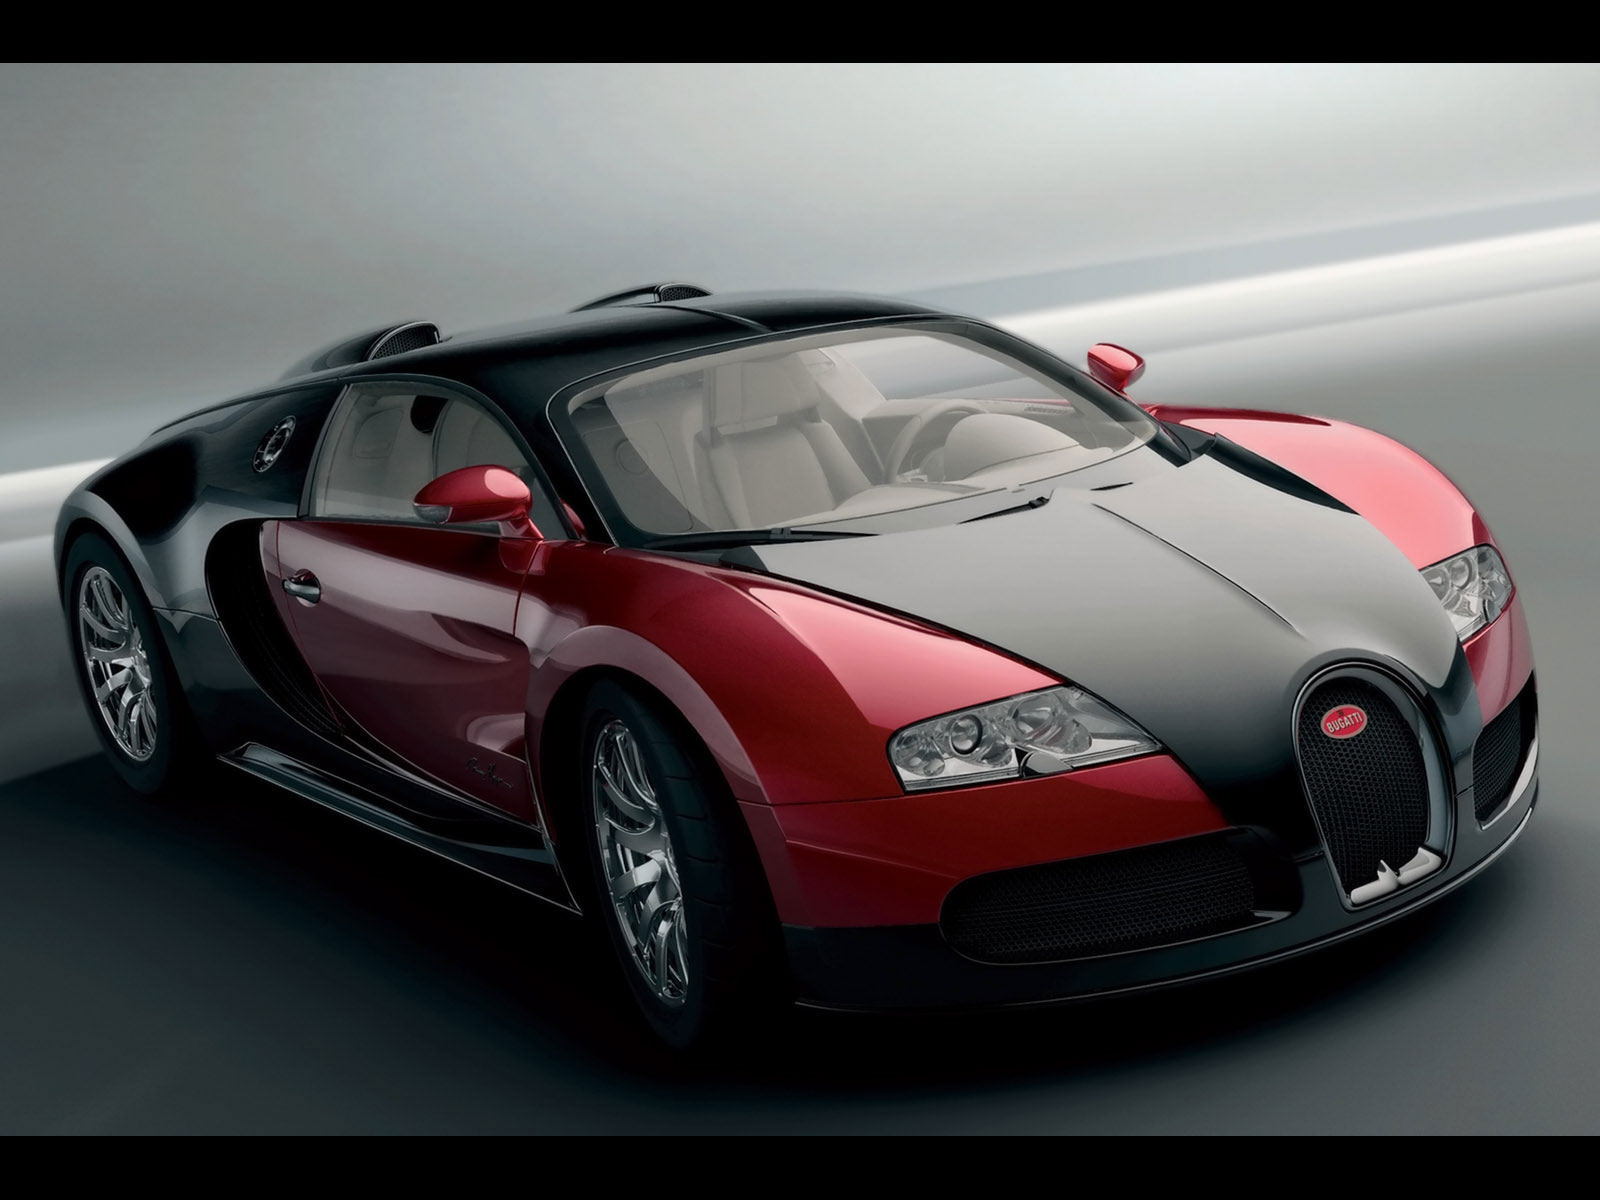 21 Best And Latest Cars HD Wallpapers - Birthday Wishes, 3D ...